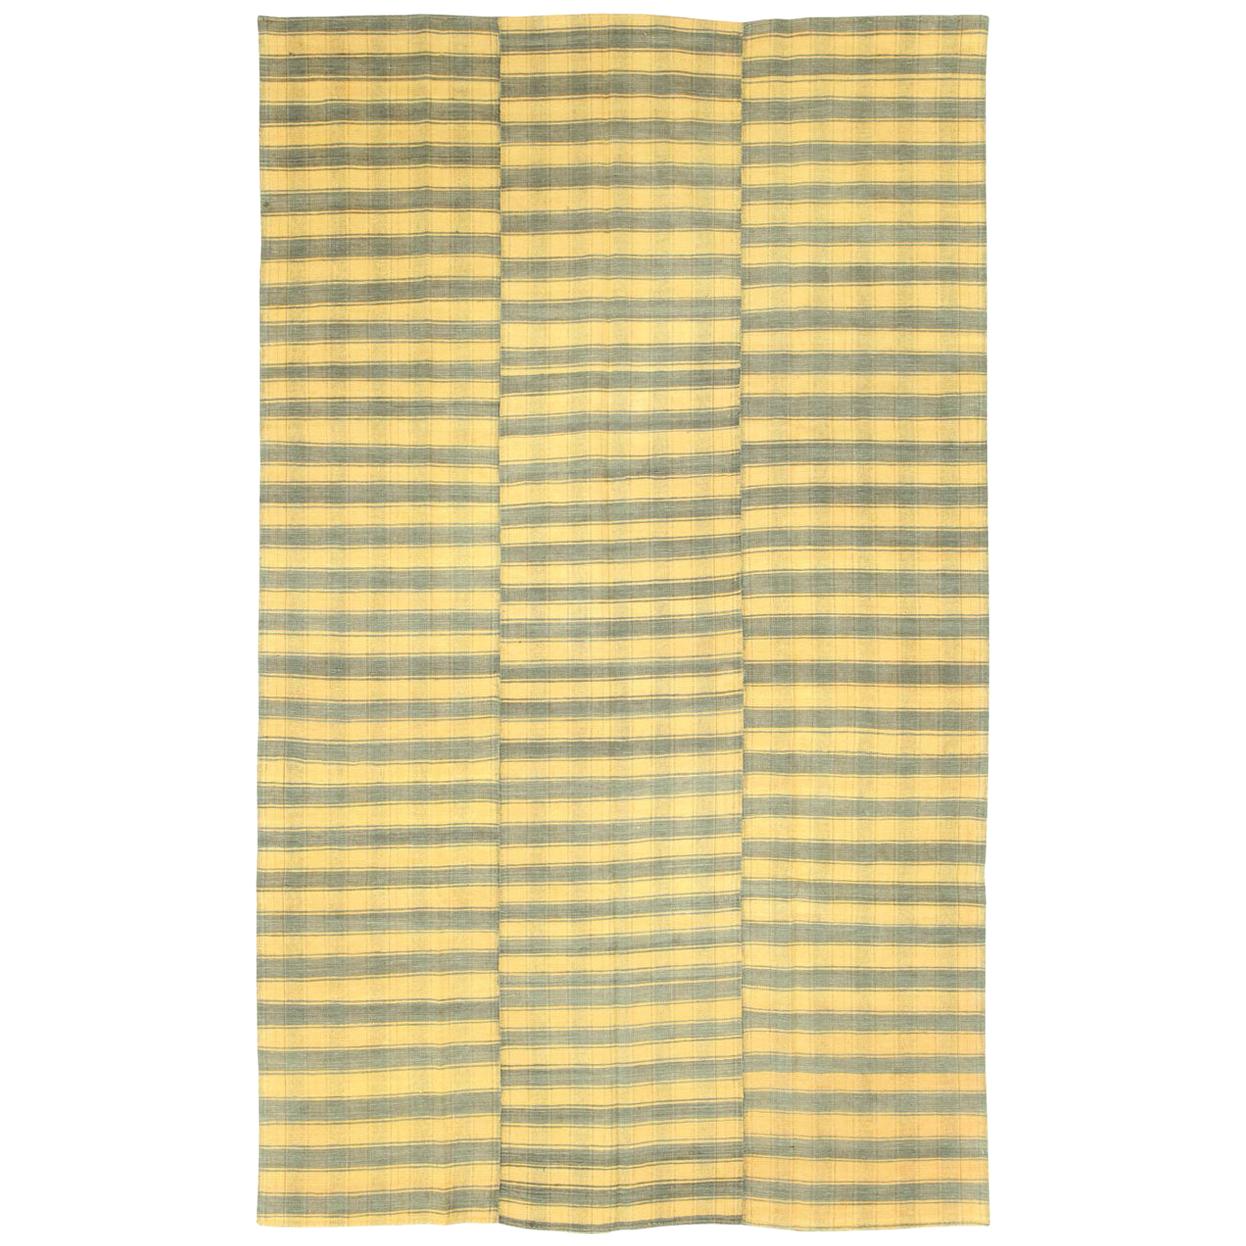 Mid-20th Century Small Room Size Turkish Flat-Weave Kilim Accent Rug in Yellow